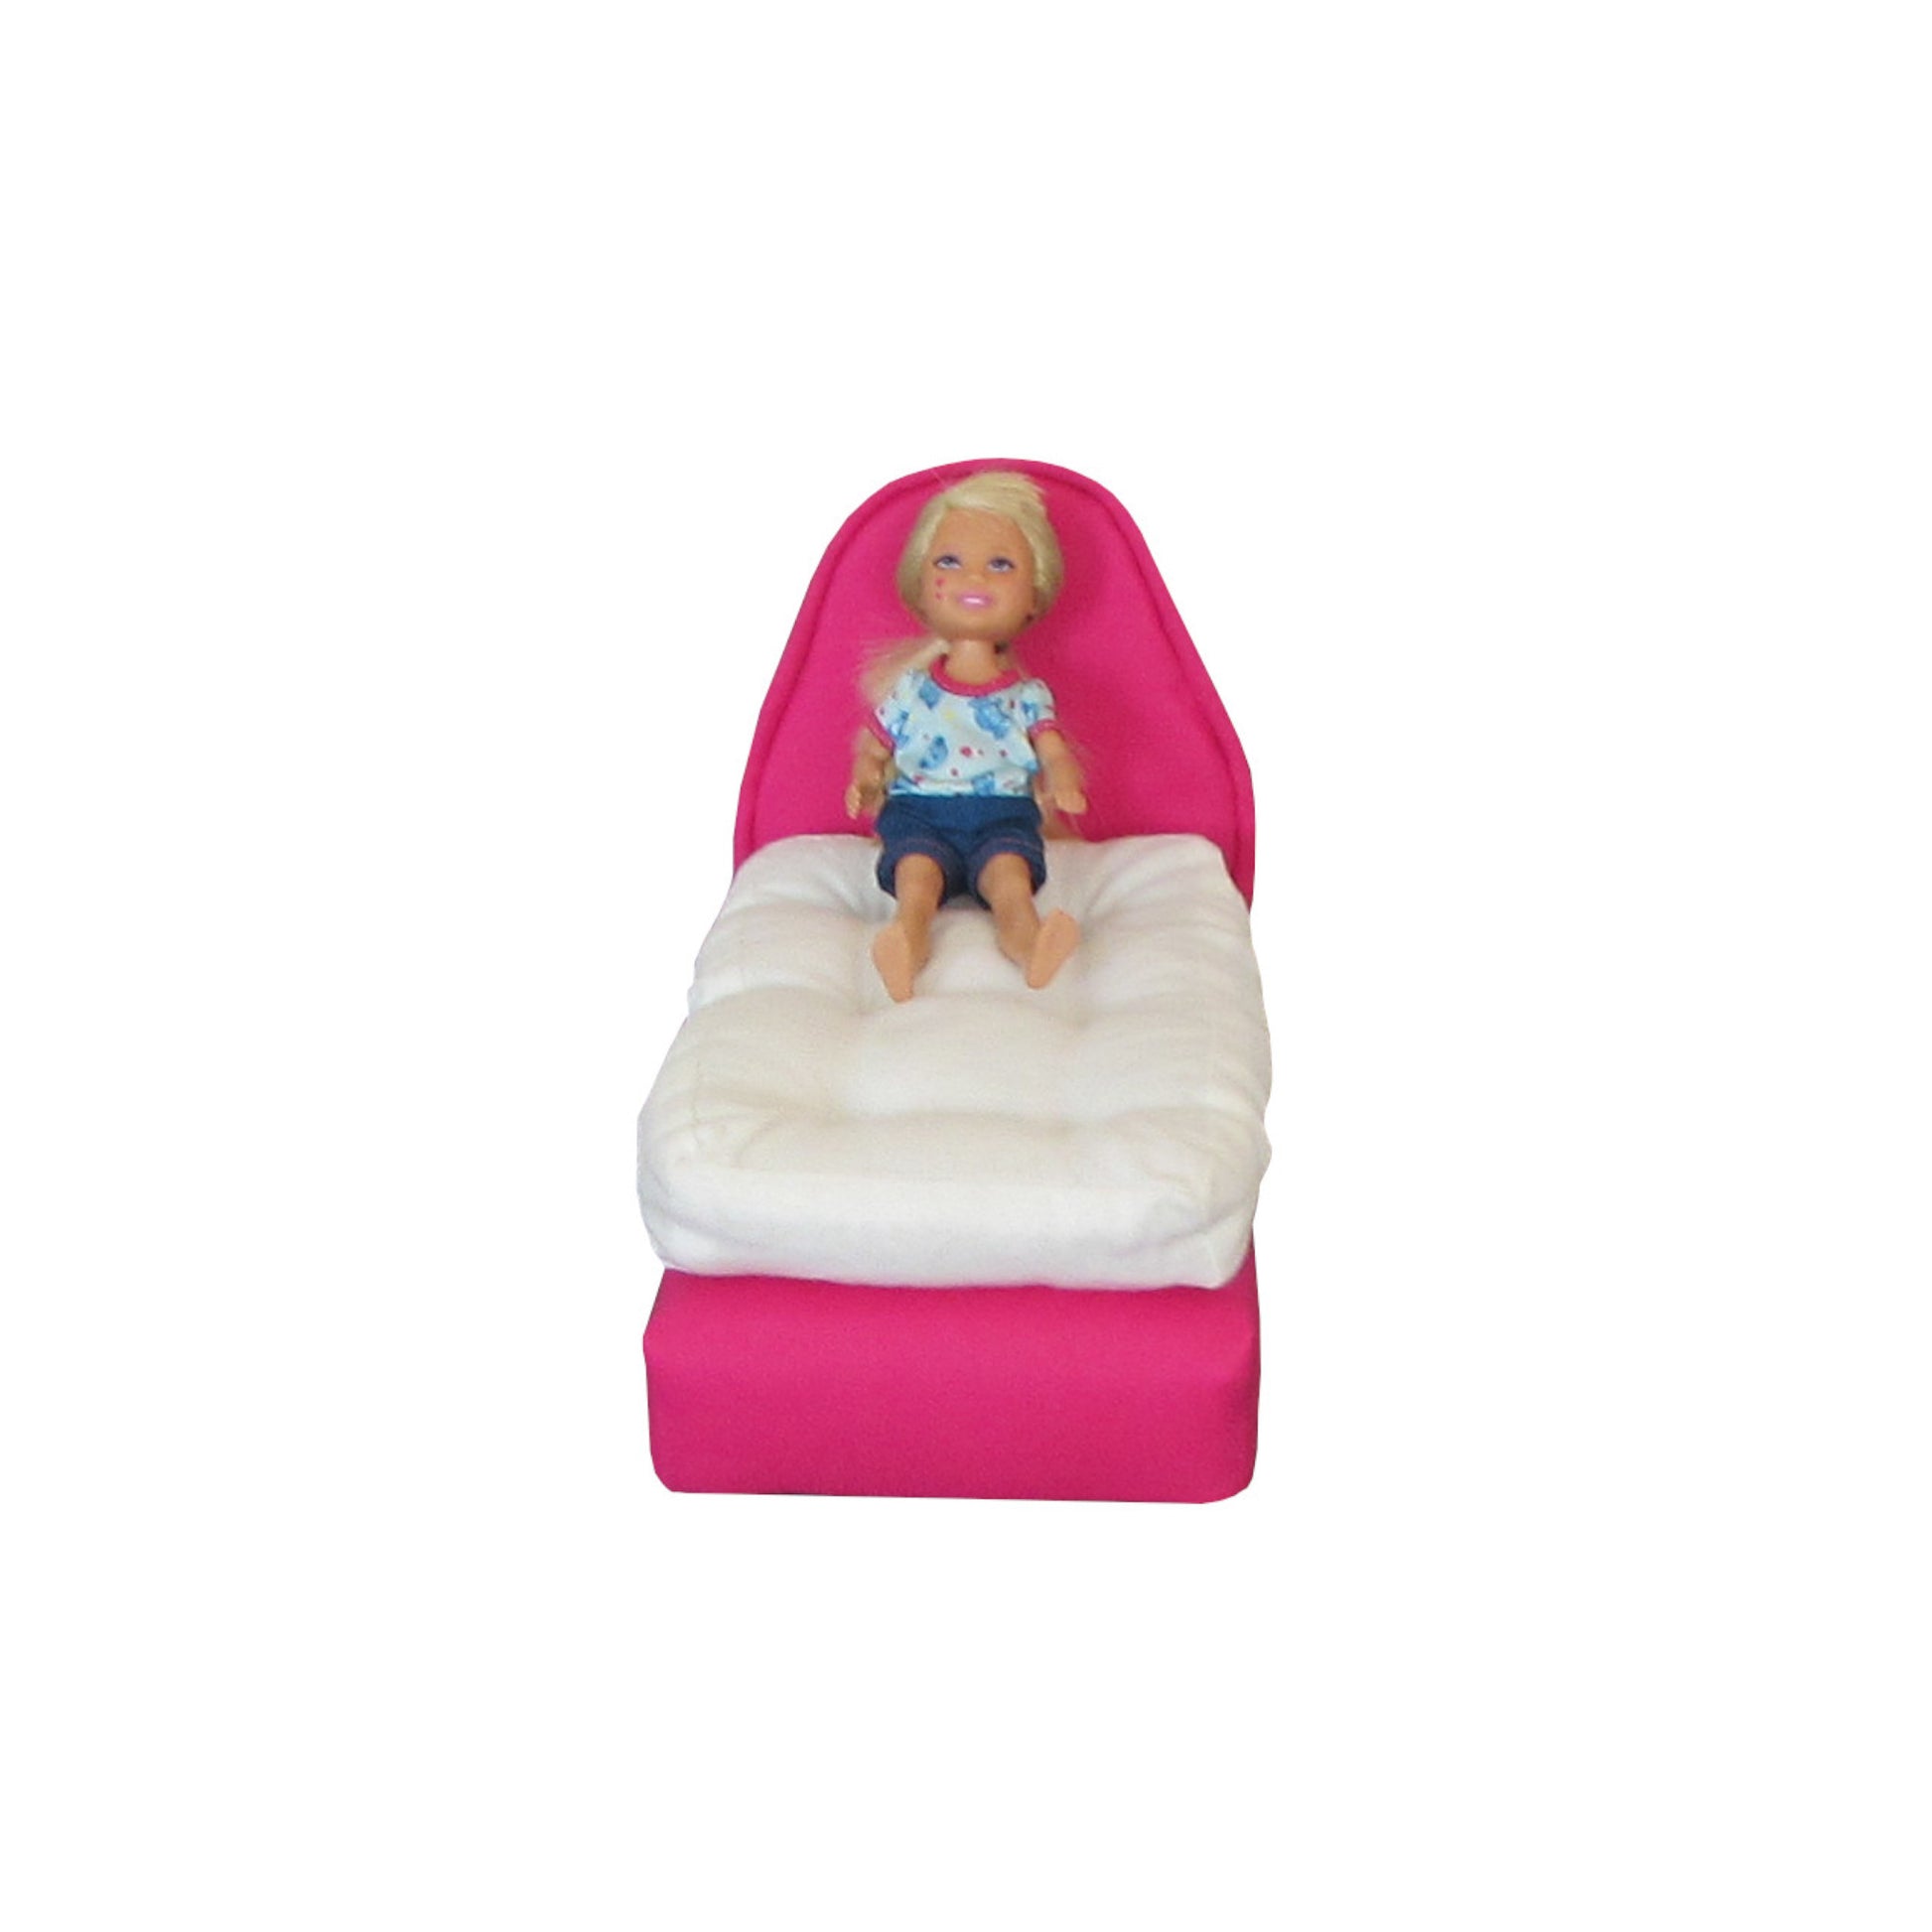 Upholstered Bright Pink Doll Bed and Mattress for 6.5-inch dolls with doll